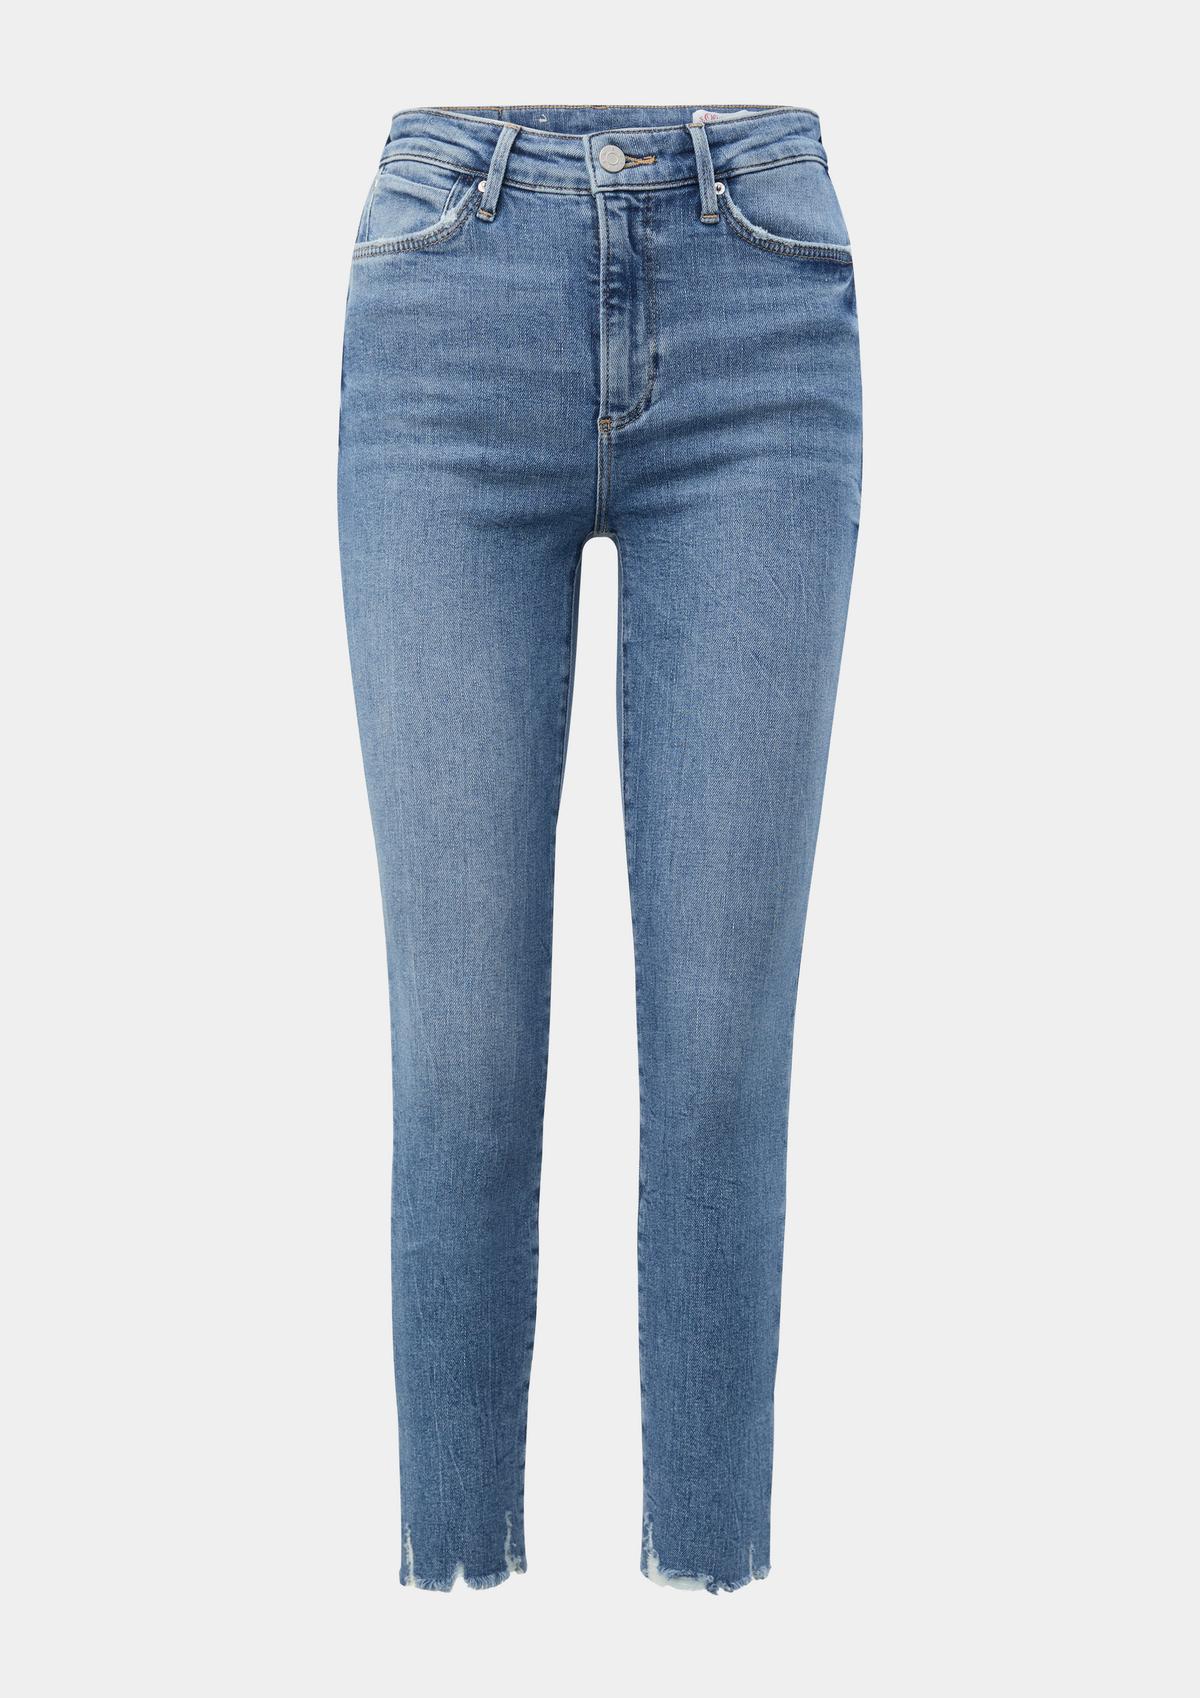 Izabell Ankle Jeans / Skinny Fit / Mid Rise / Skinny Leg / Stretch Cotton -  blue